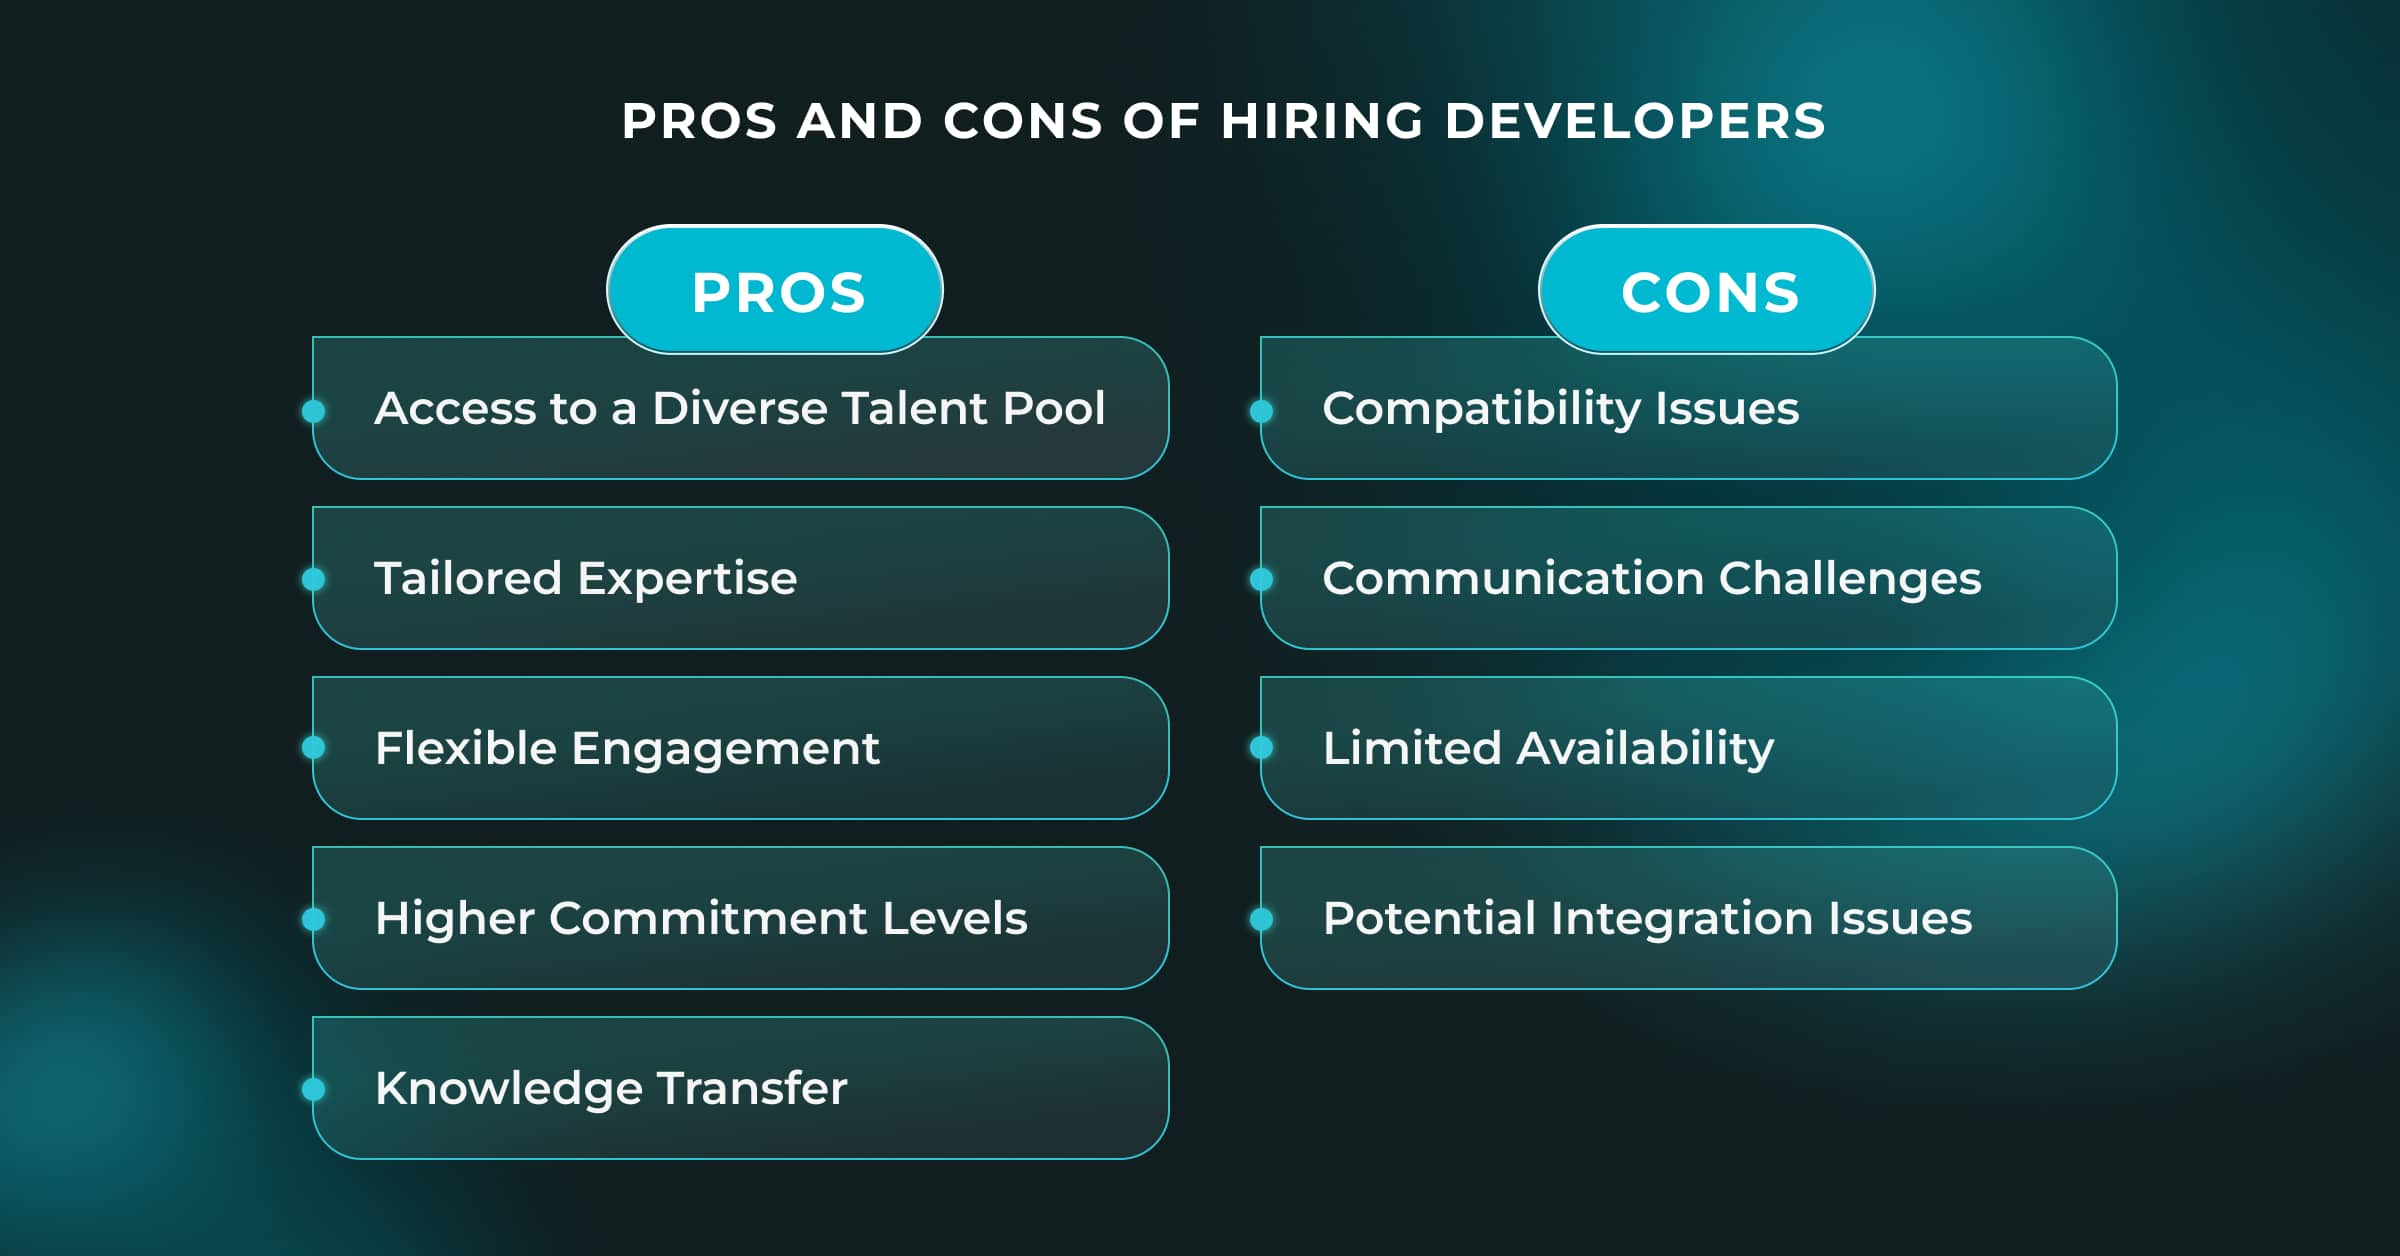 Pros and Cons of Custom-Hired Developers